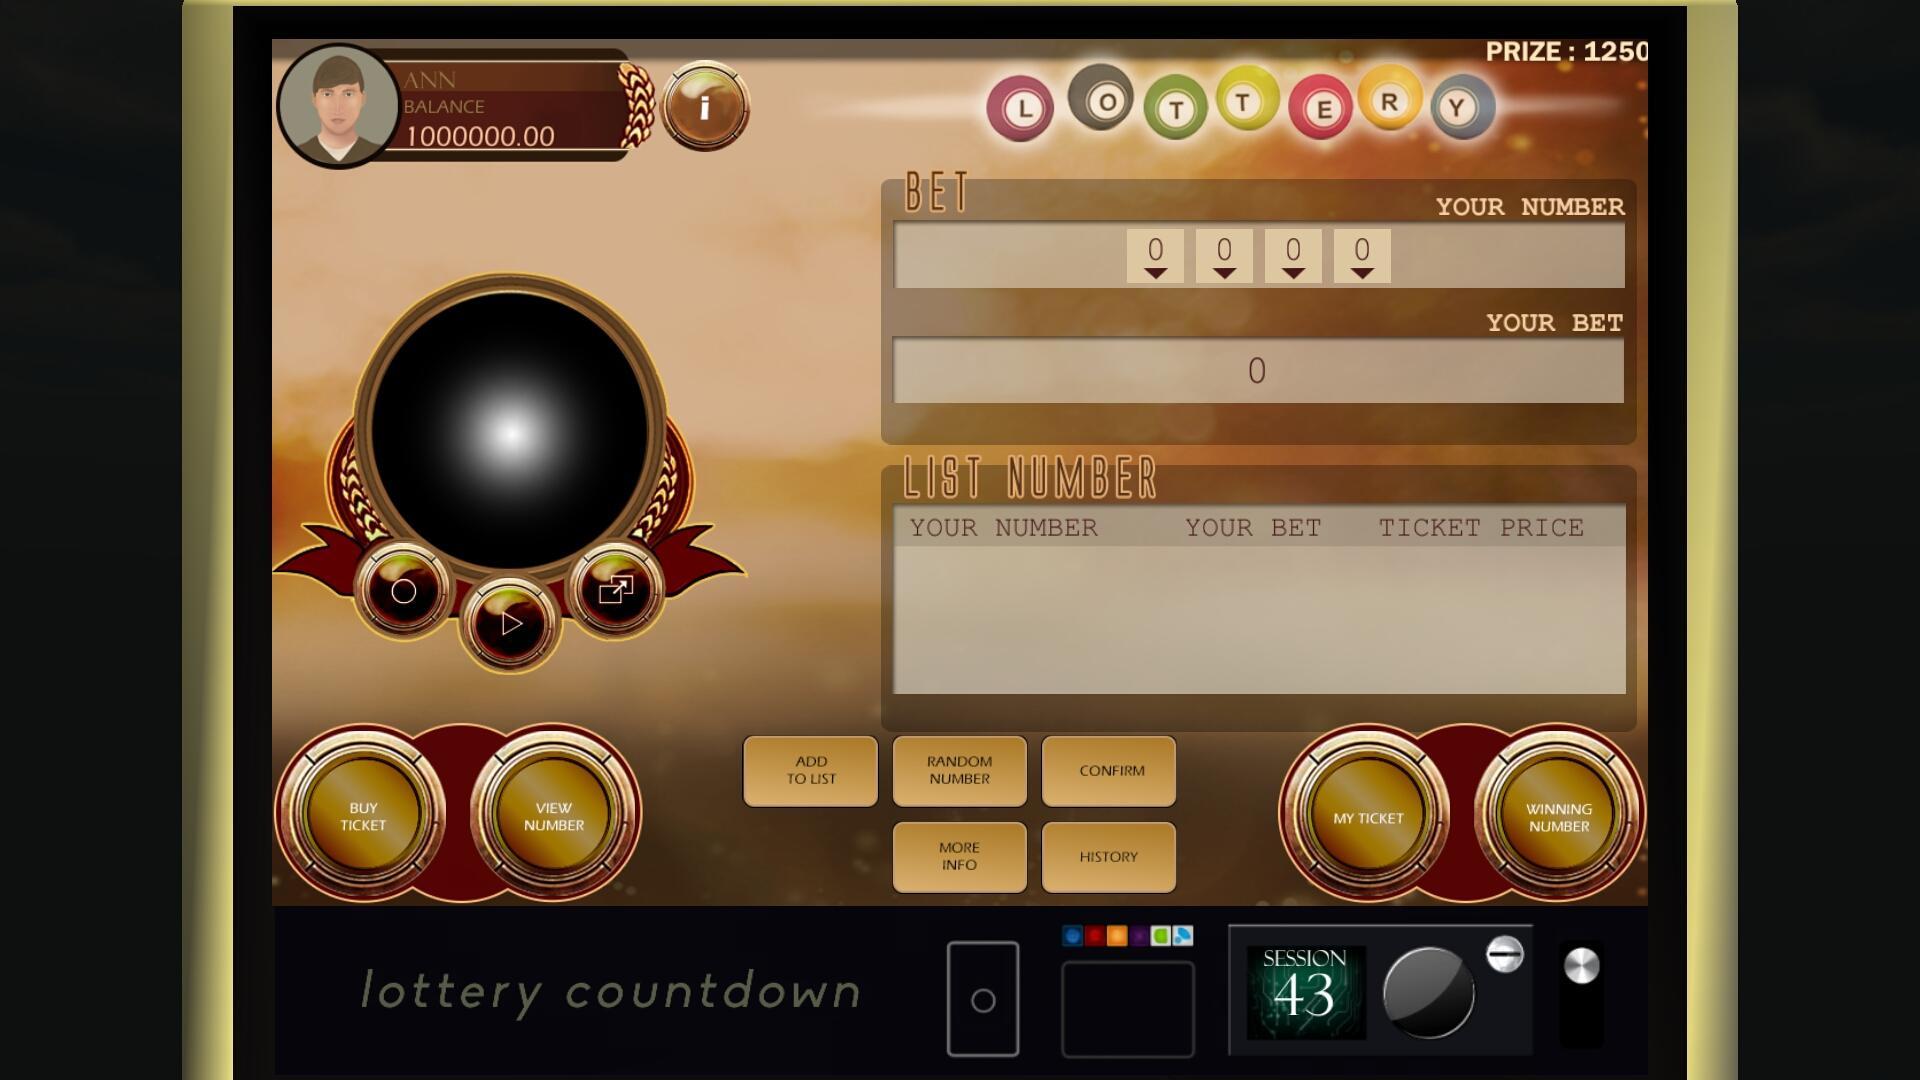 Togel Netherland
, Free Lottery For Netherland 4d For Android Apk Download